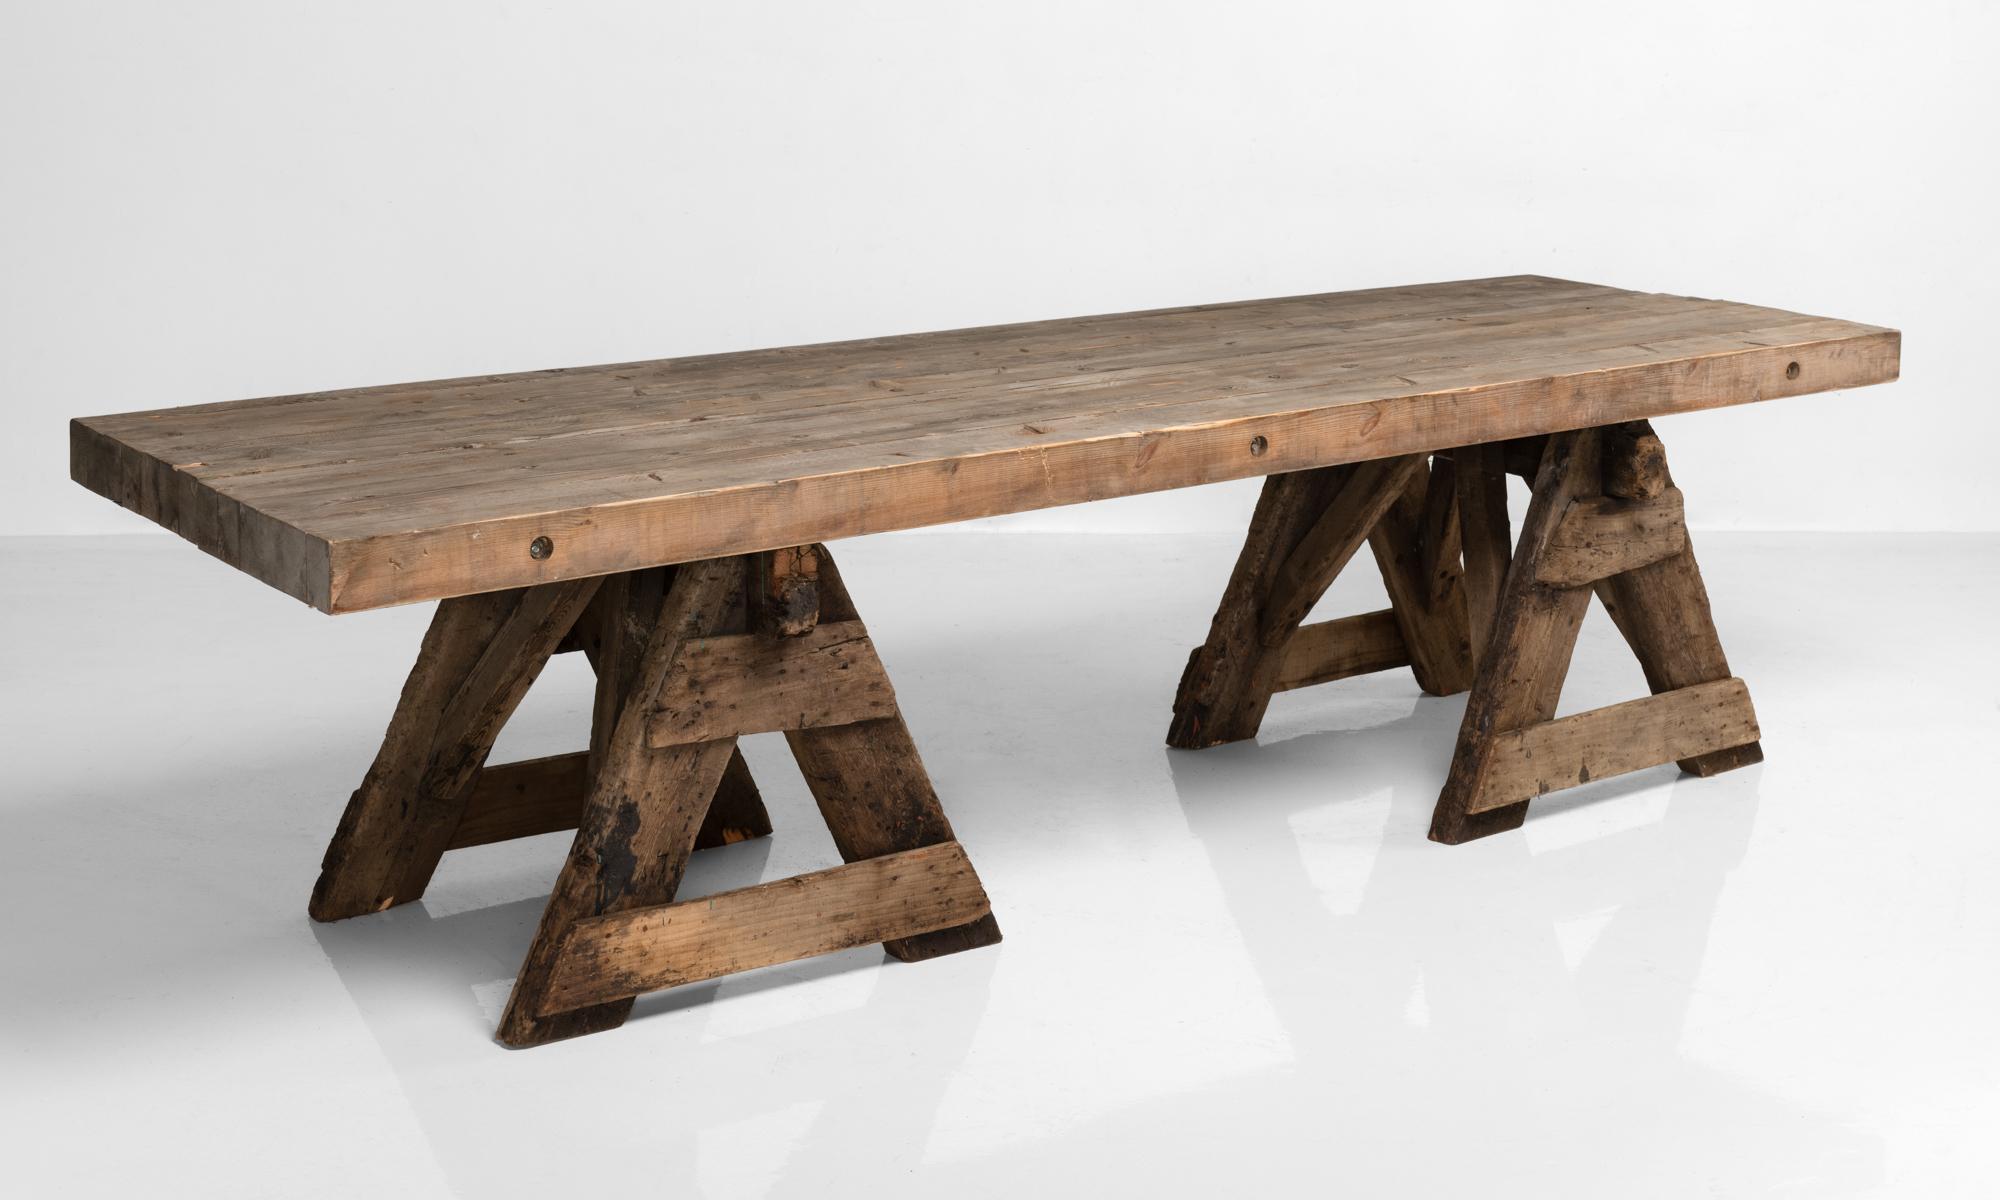 Primitive Work / Dining Trestle Table, France, circa 1930

Large, rustic form with sawhorse legs and top made of multiple segments of wood.